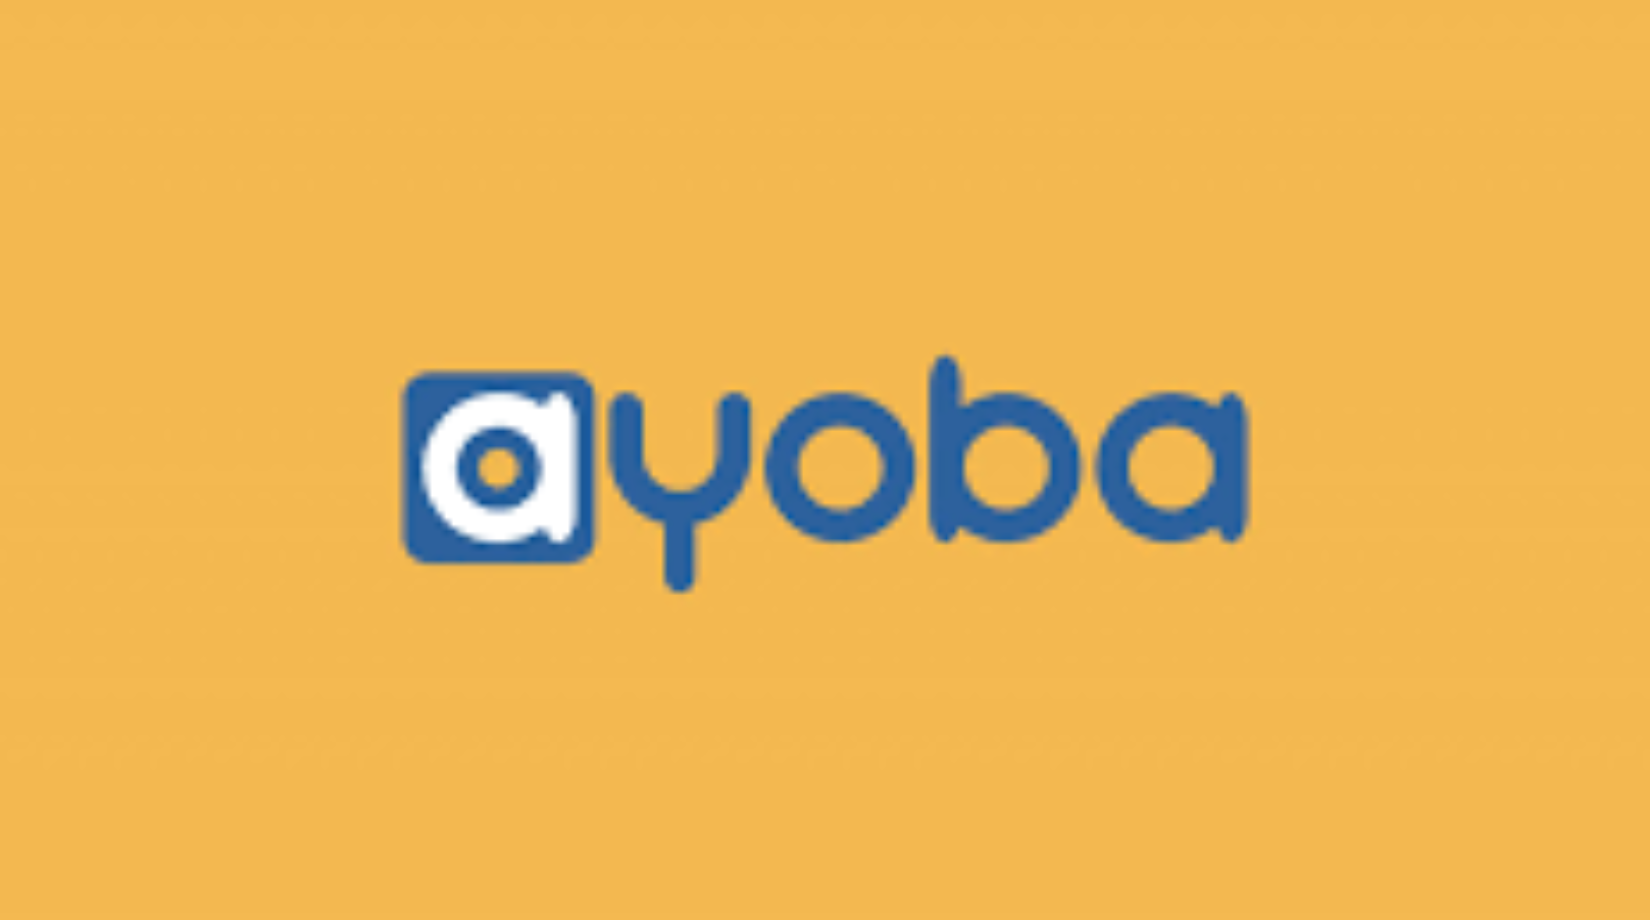 Africa Super App ayoba passes 30m monthly active users milestone